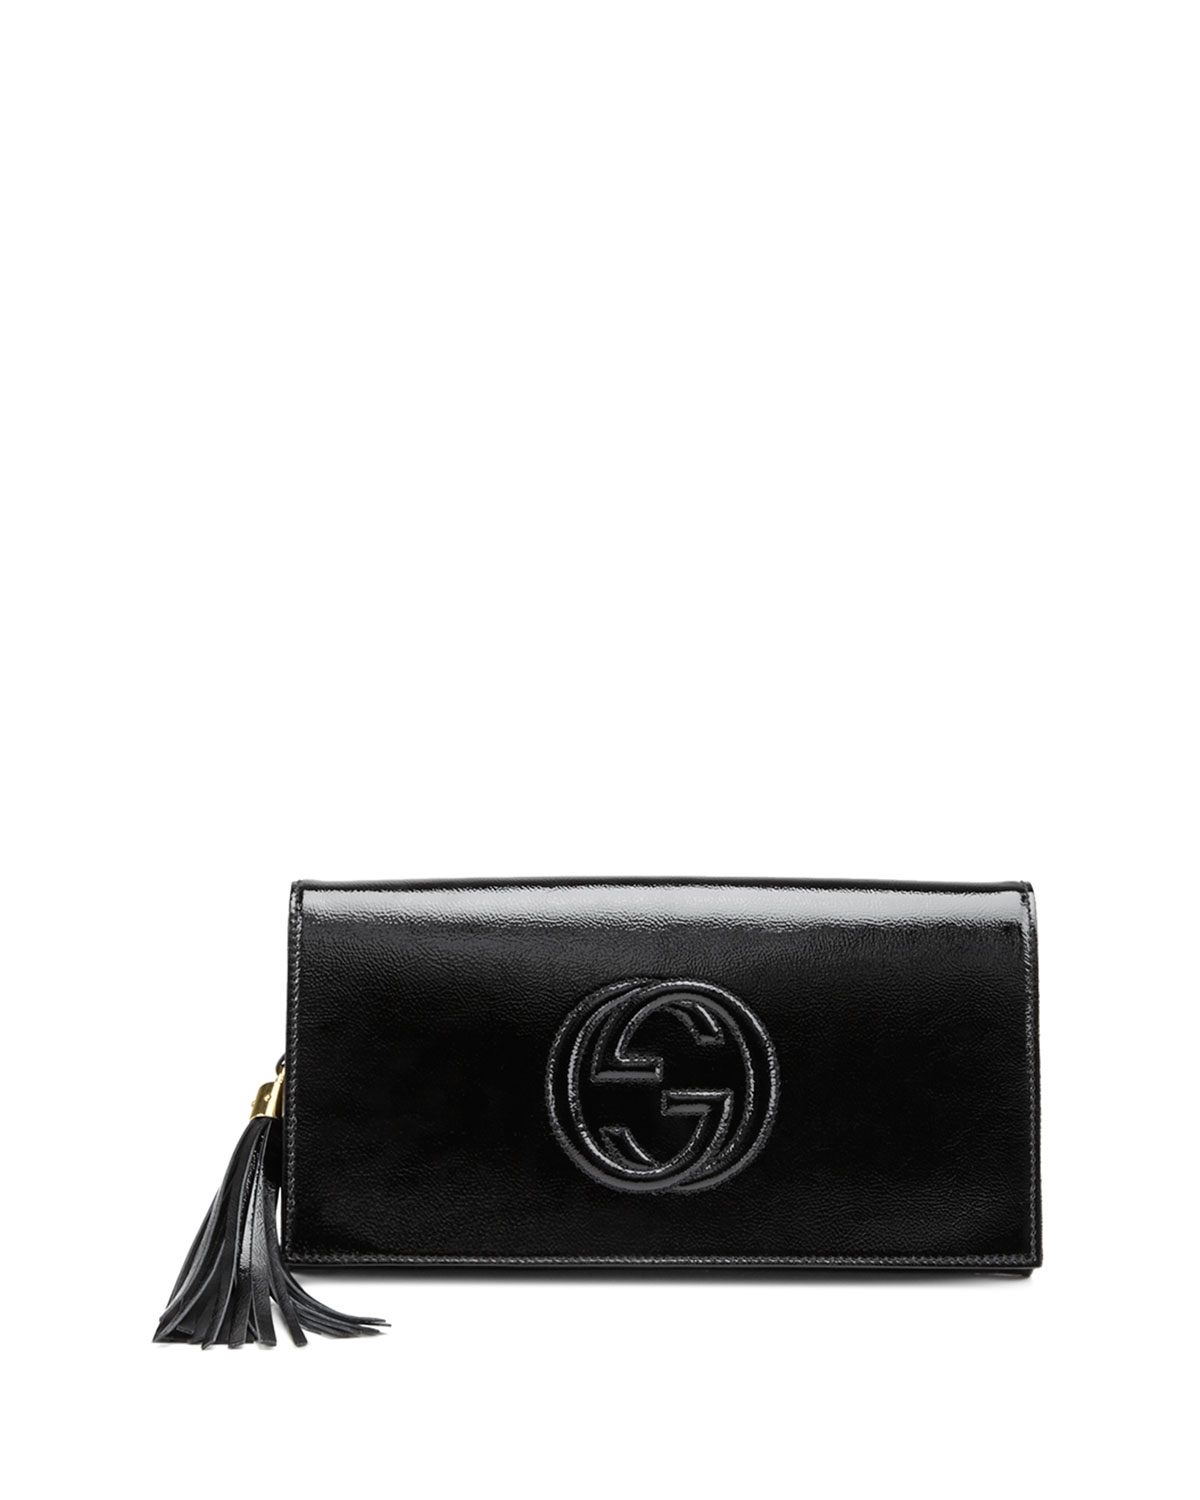 Lyst - Gucci Soho Patent Leather Clutch Bag in Black